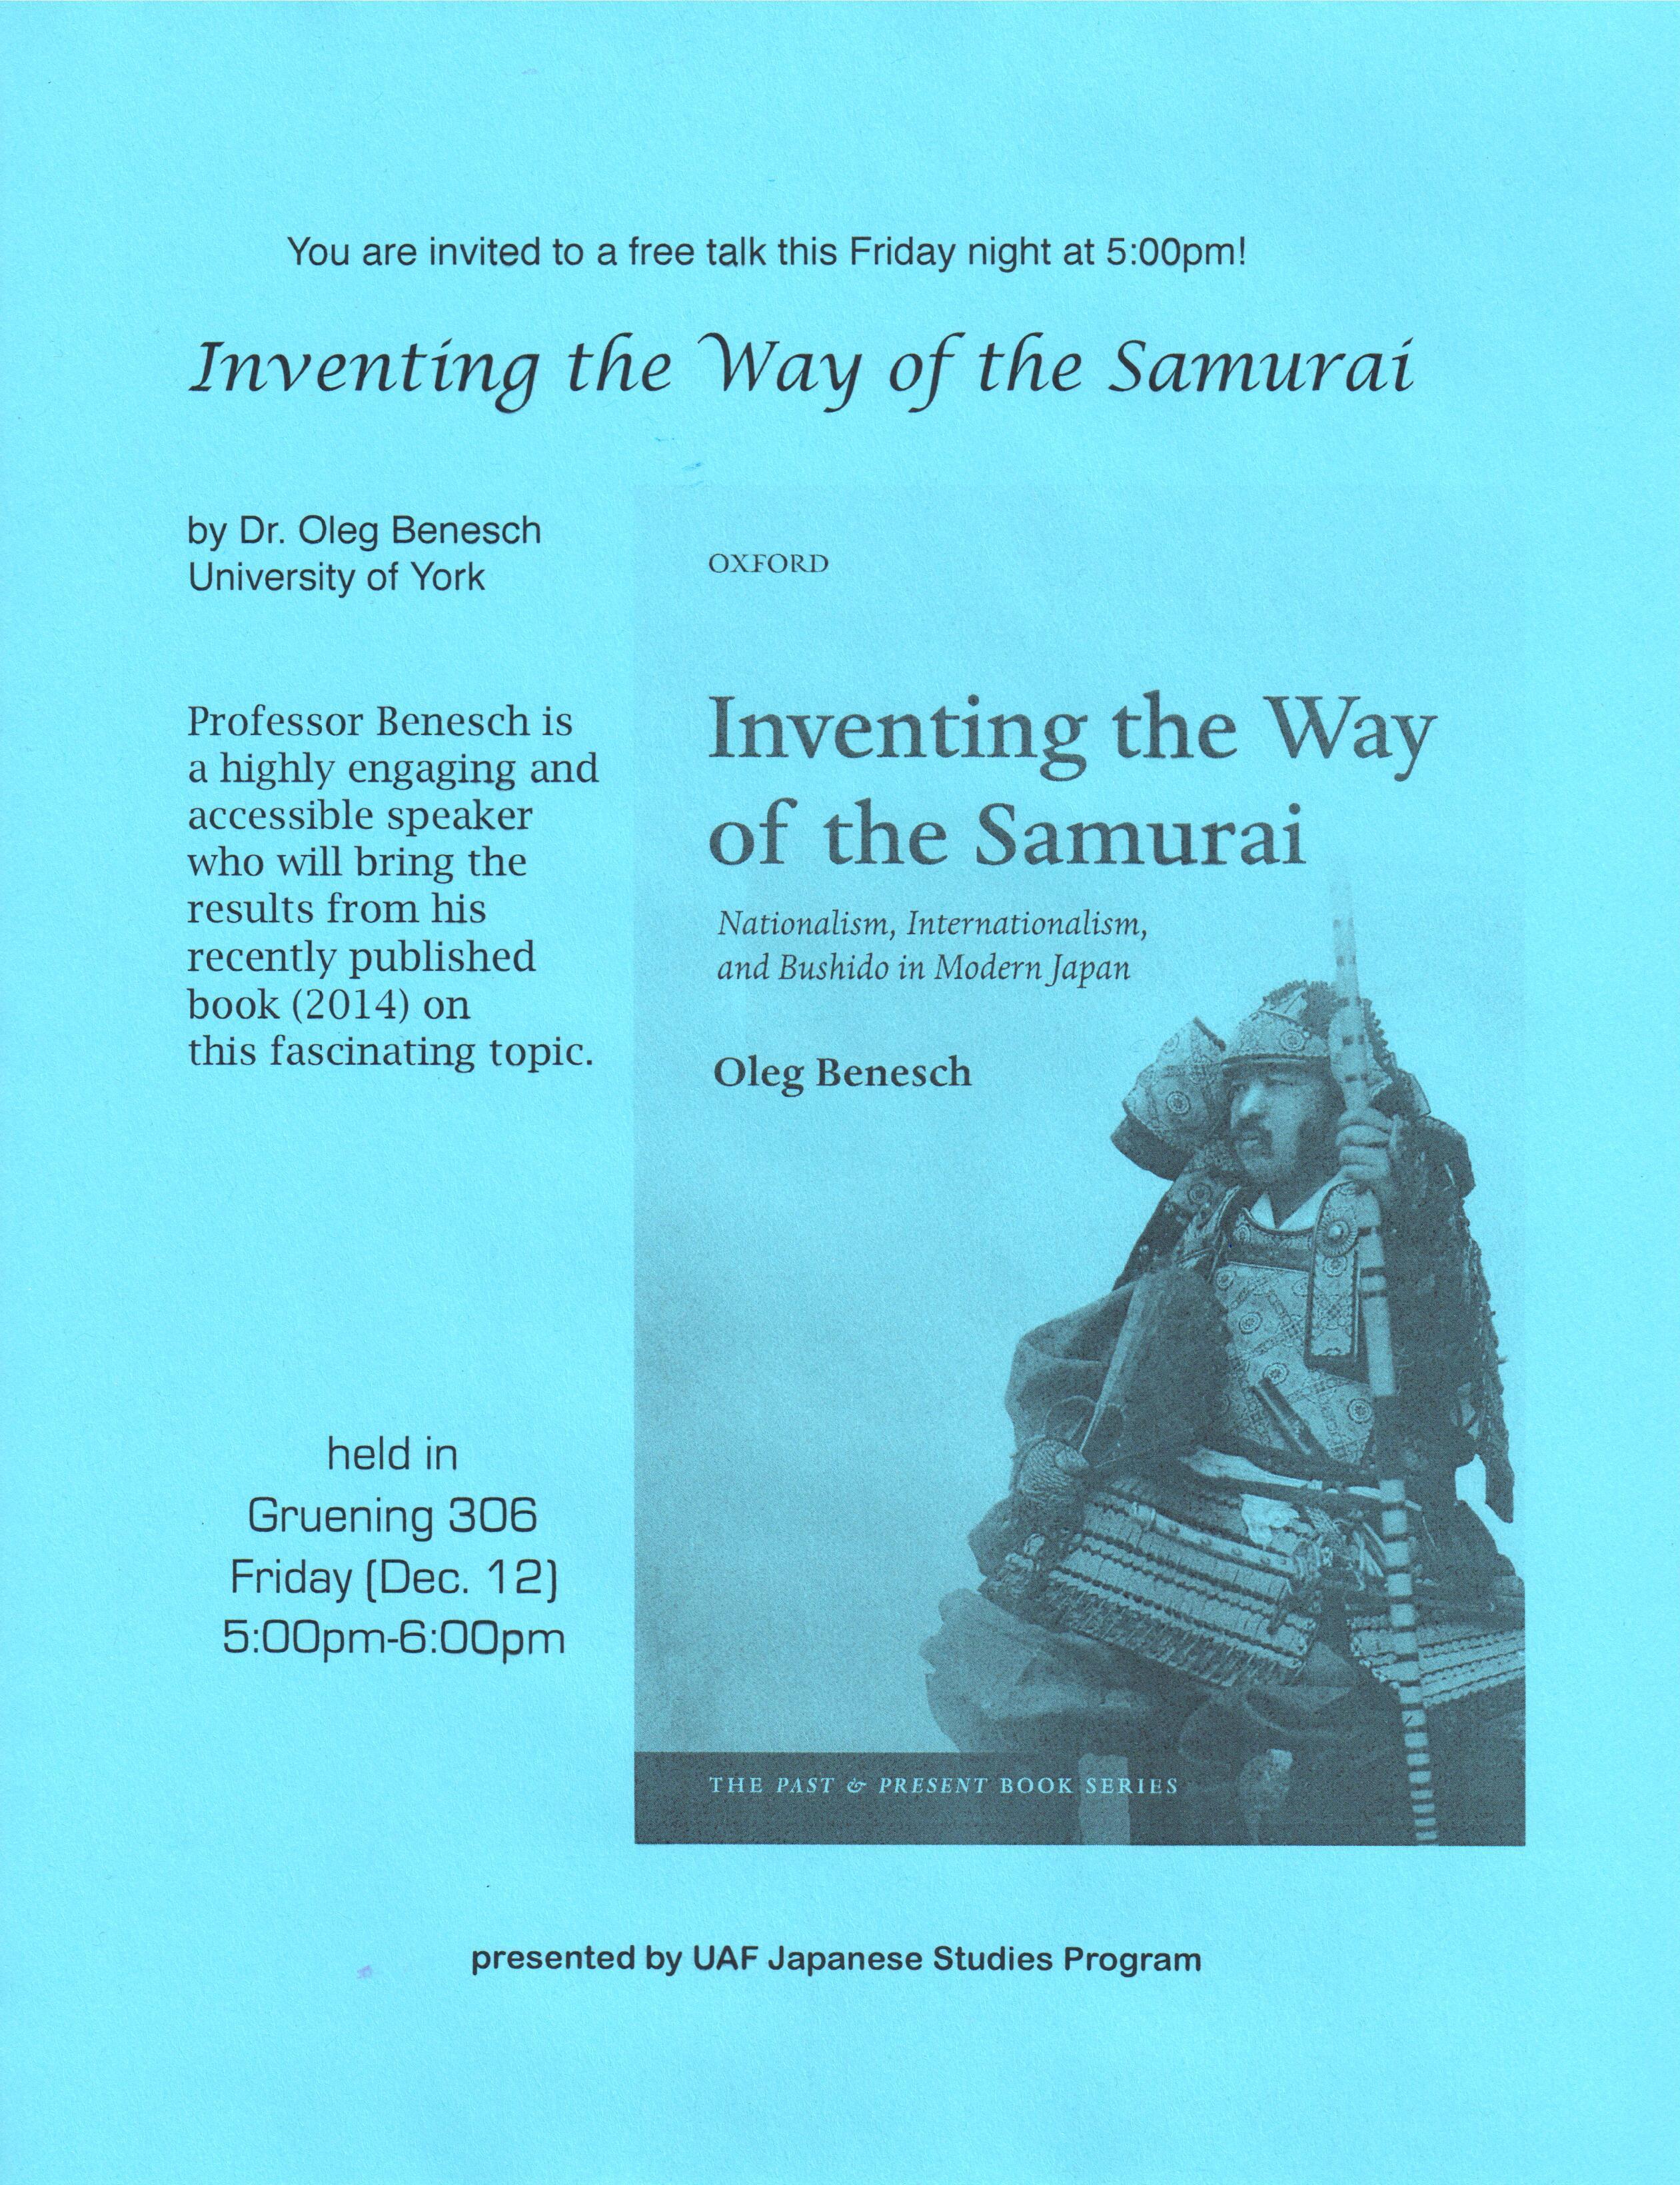 Flyer for free talk by Dr. Oleg Benesch - Inventing the Way of the Samurai